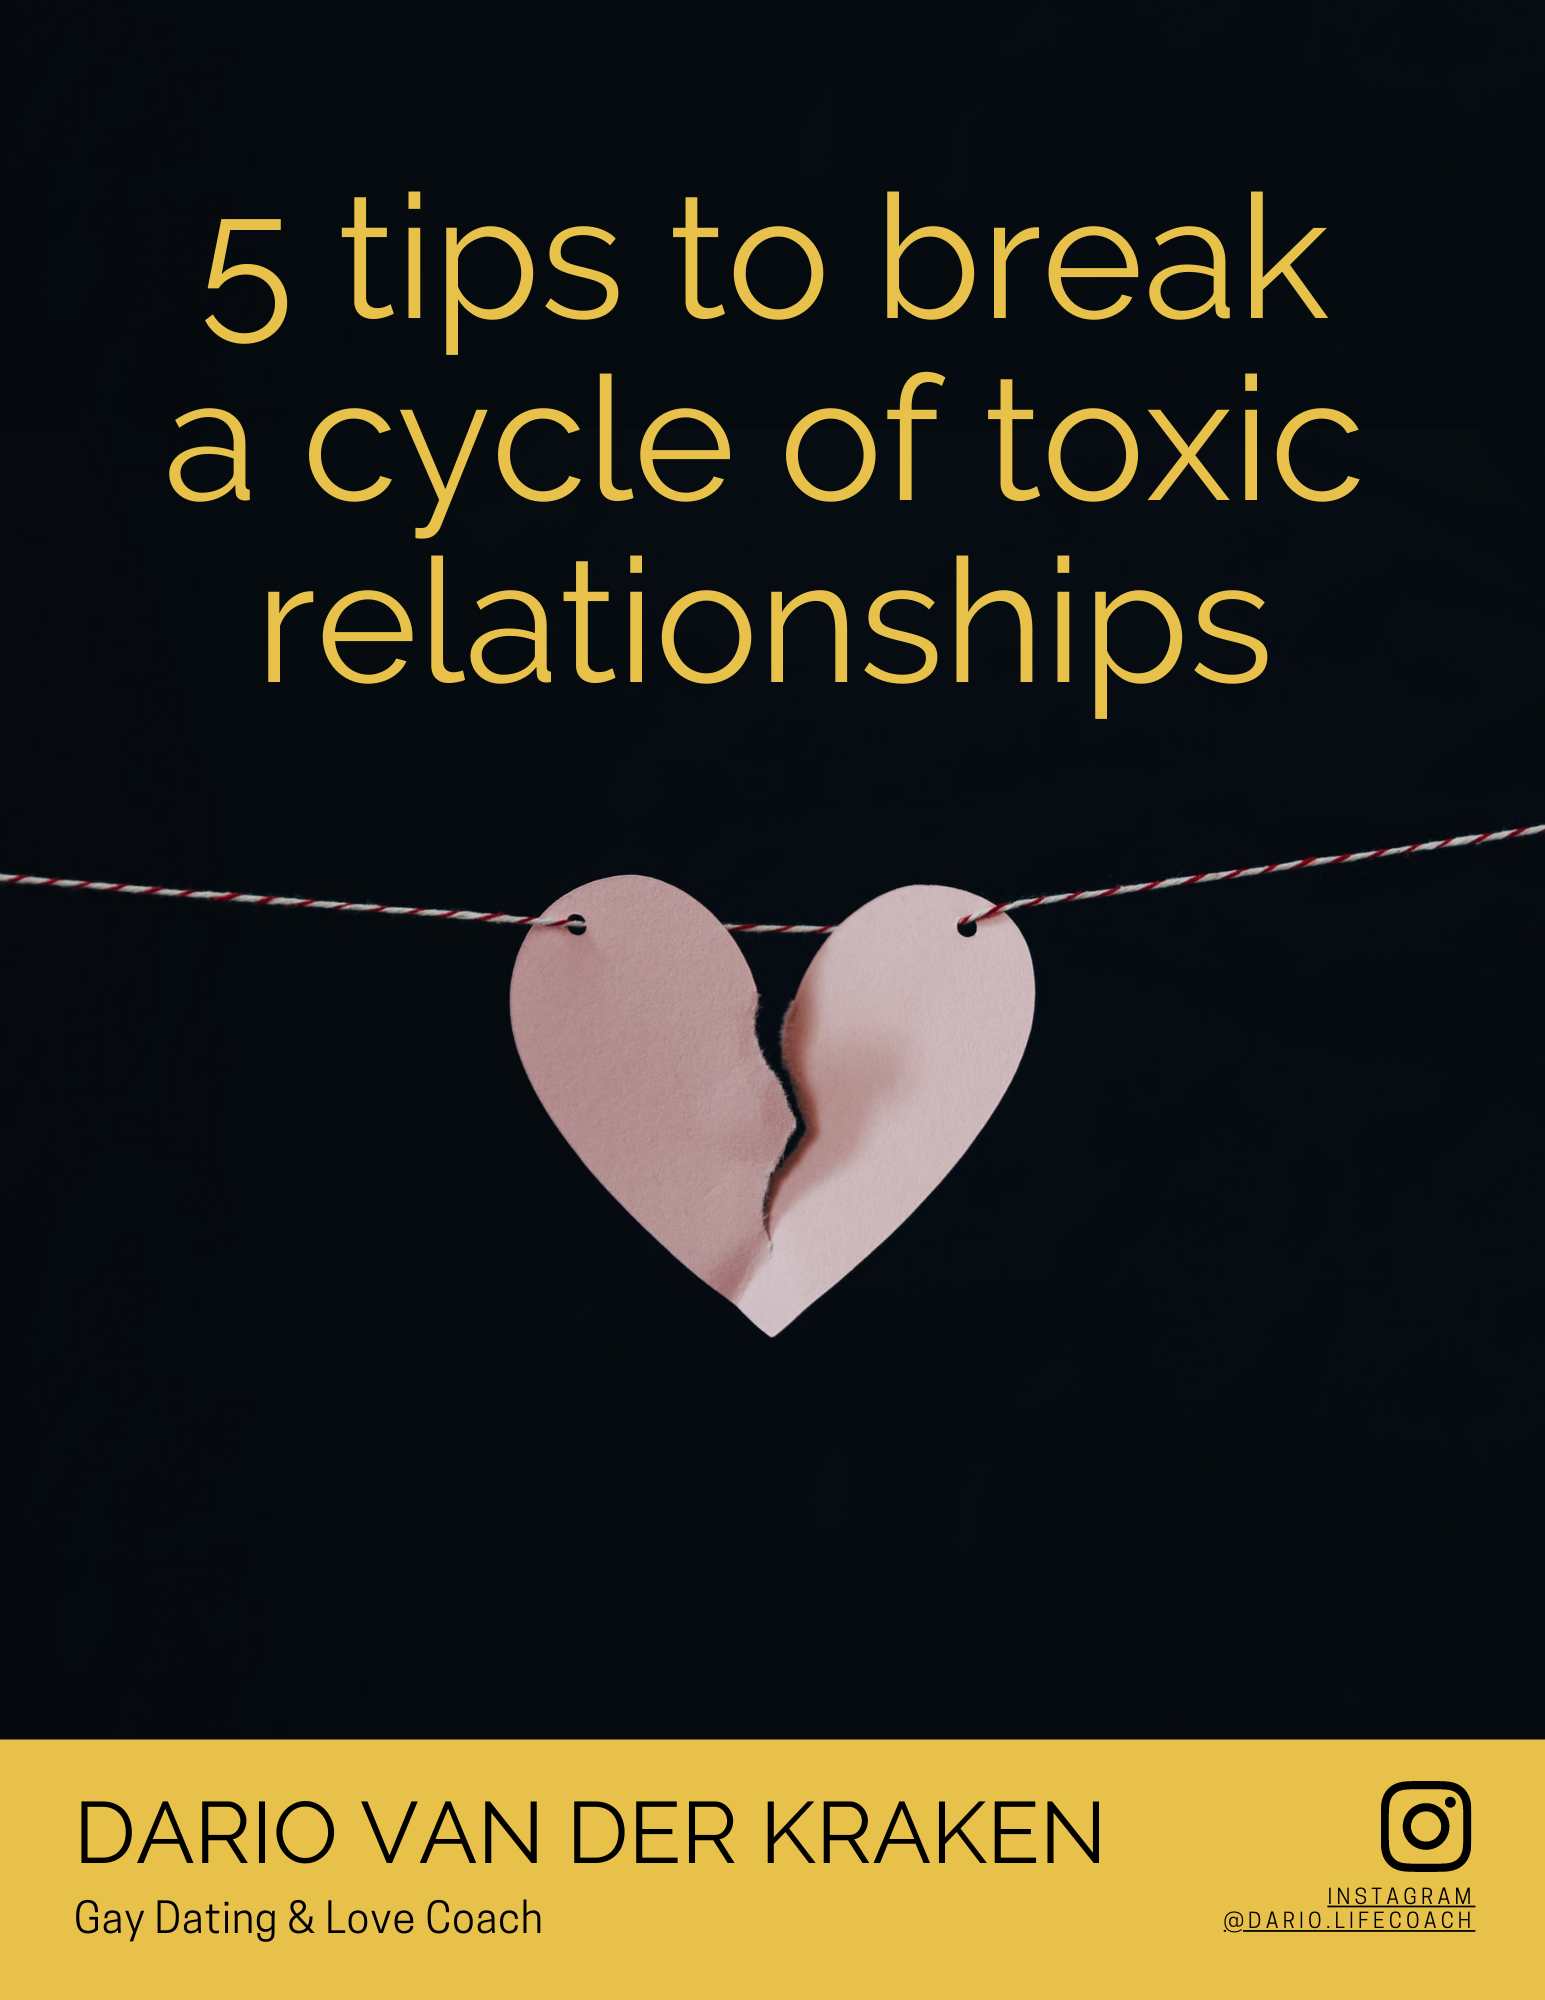 5 tips to break a cycle of toxic relationships - Dario Coach